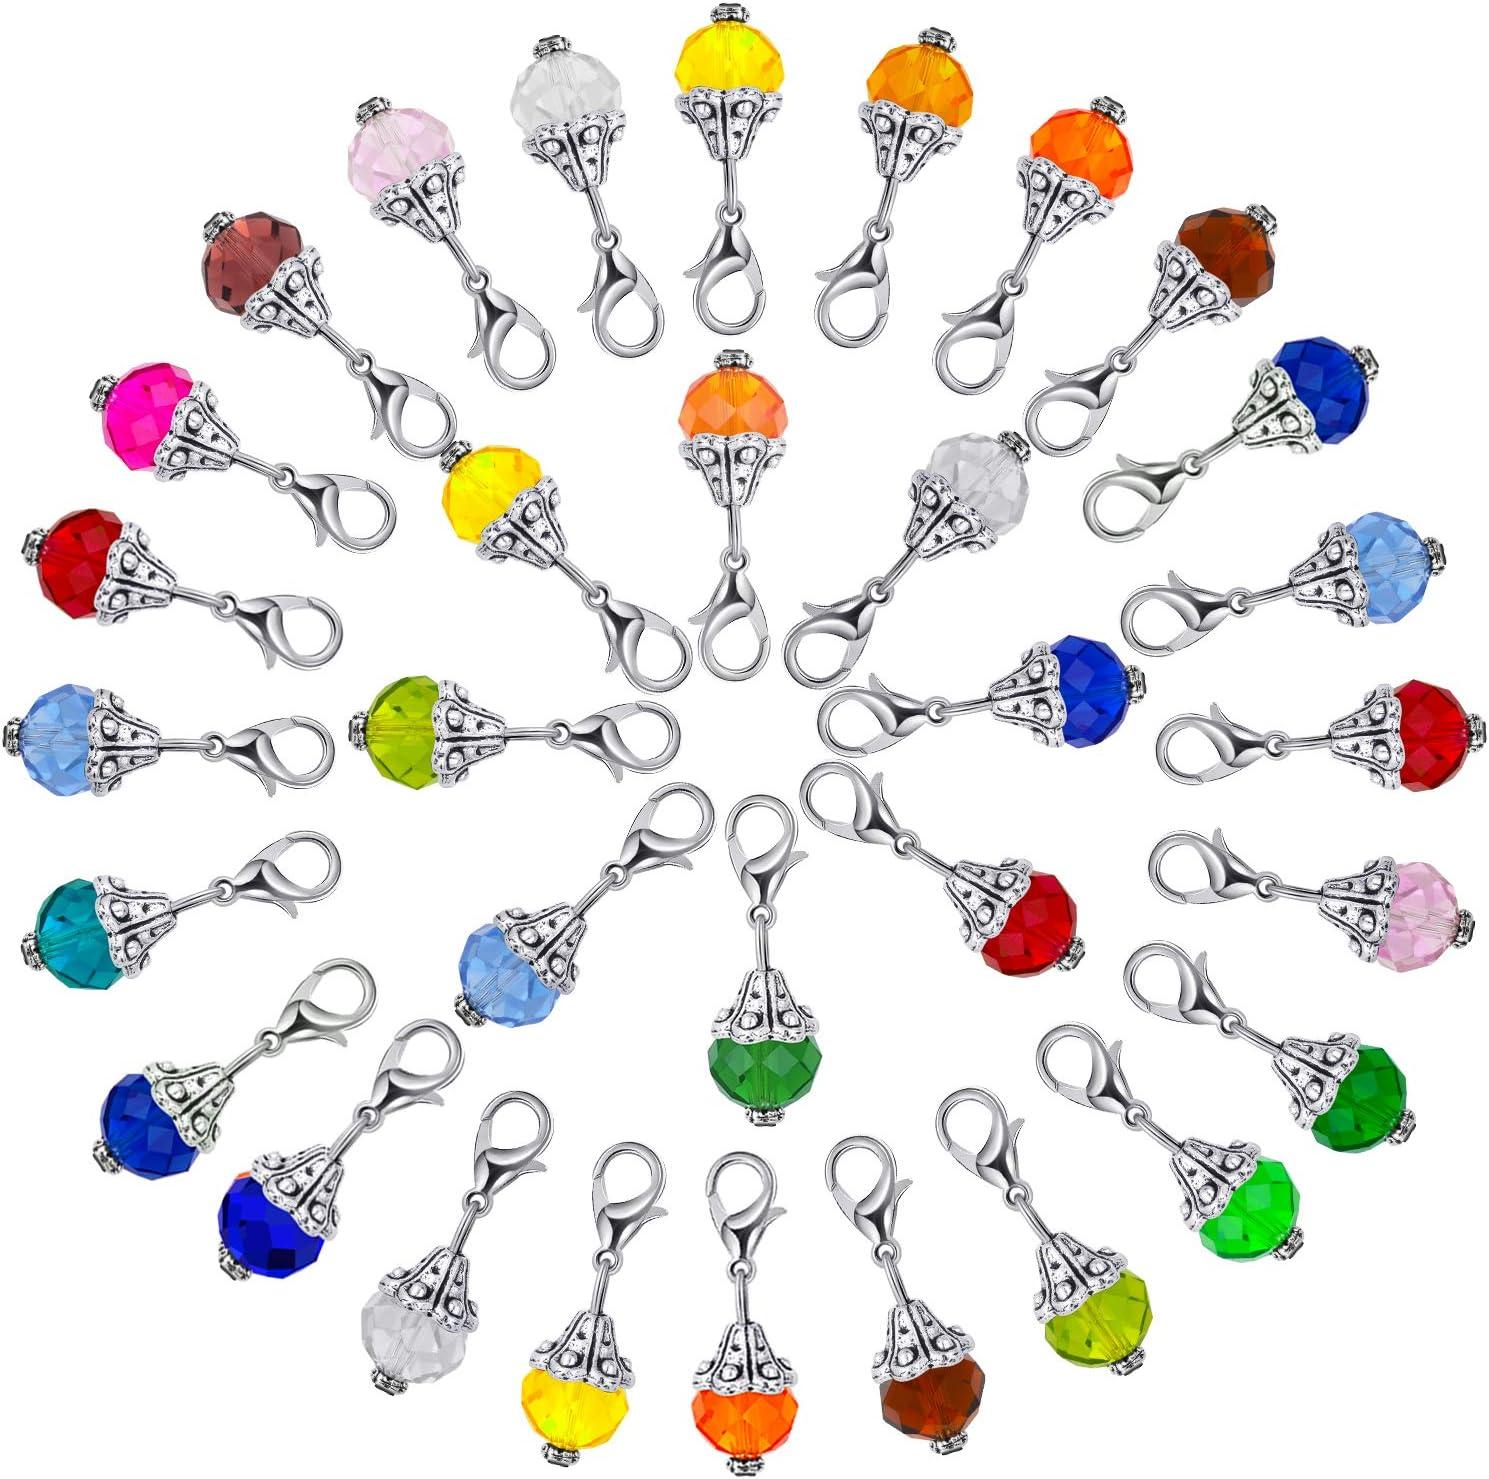 Charm Stainless Steel, Charms for Jewelry Making - Dearbeads